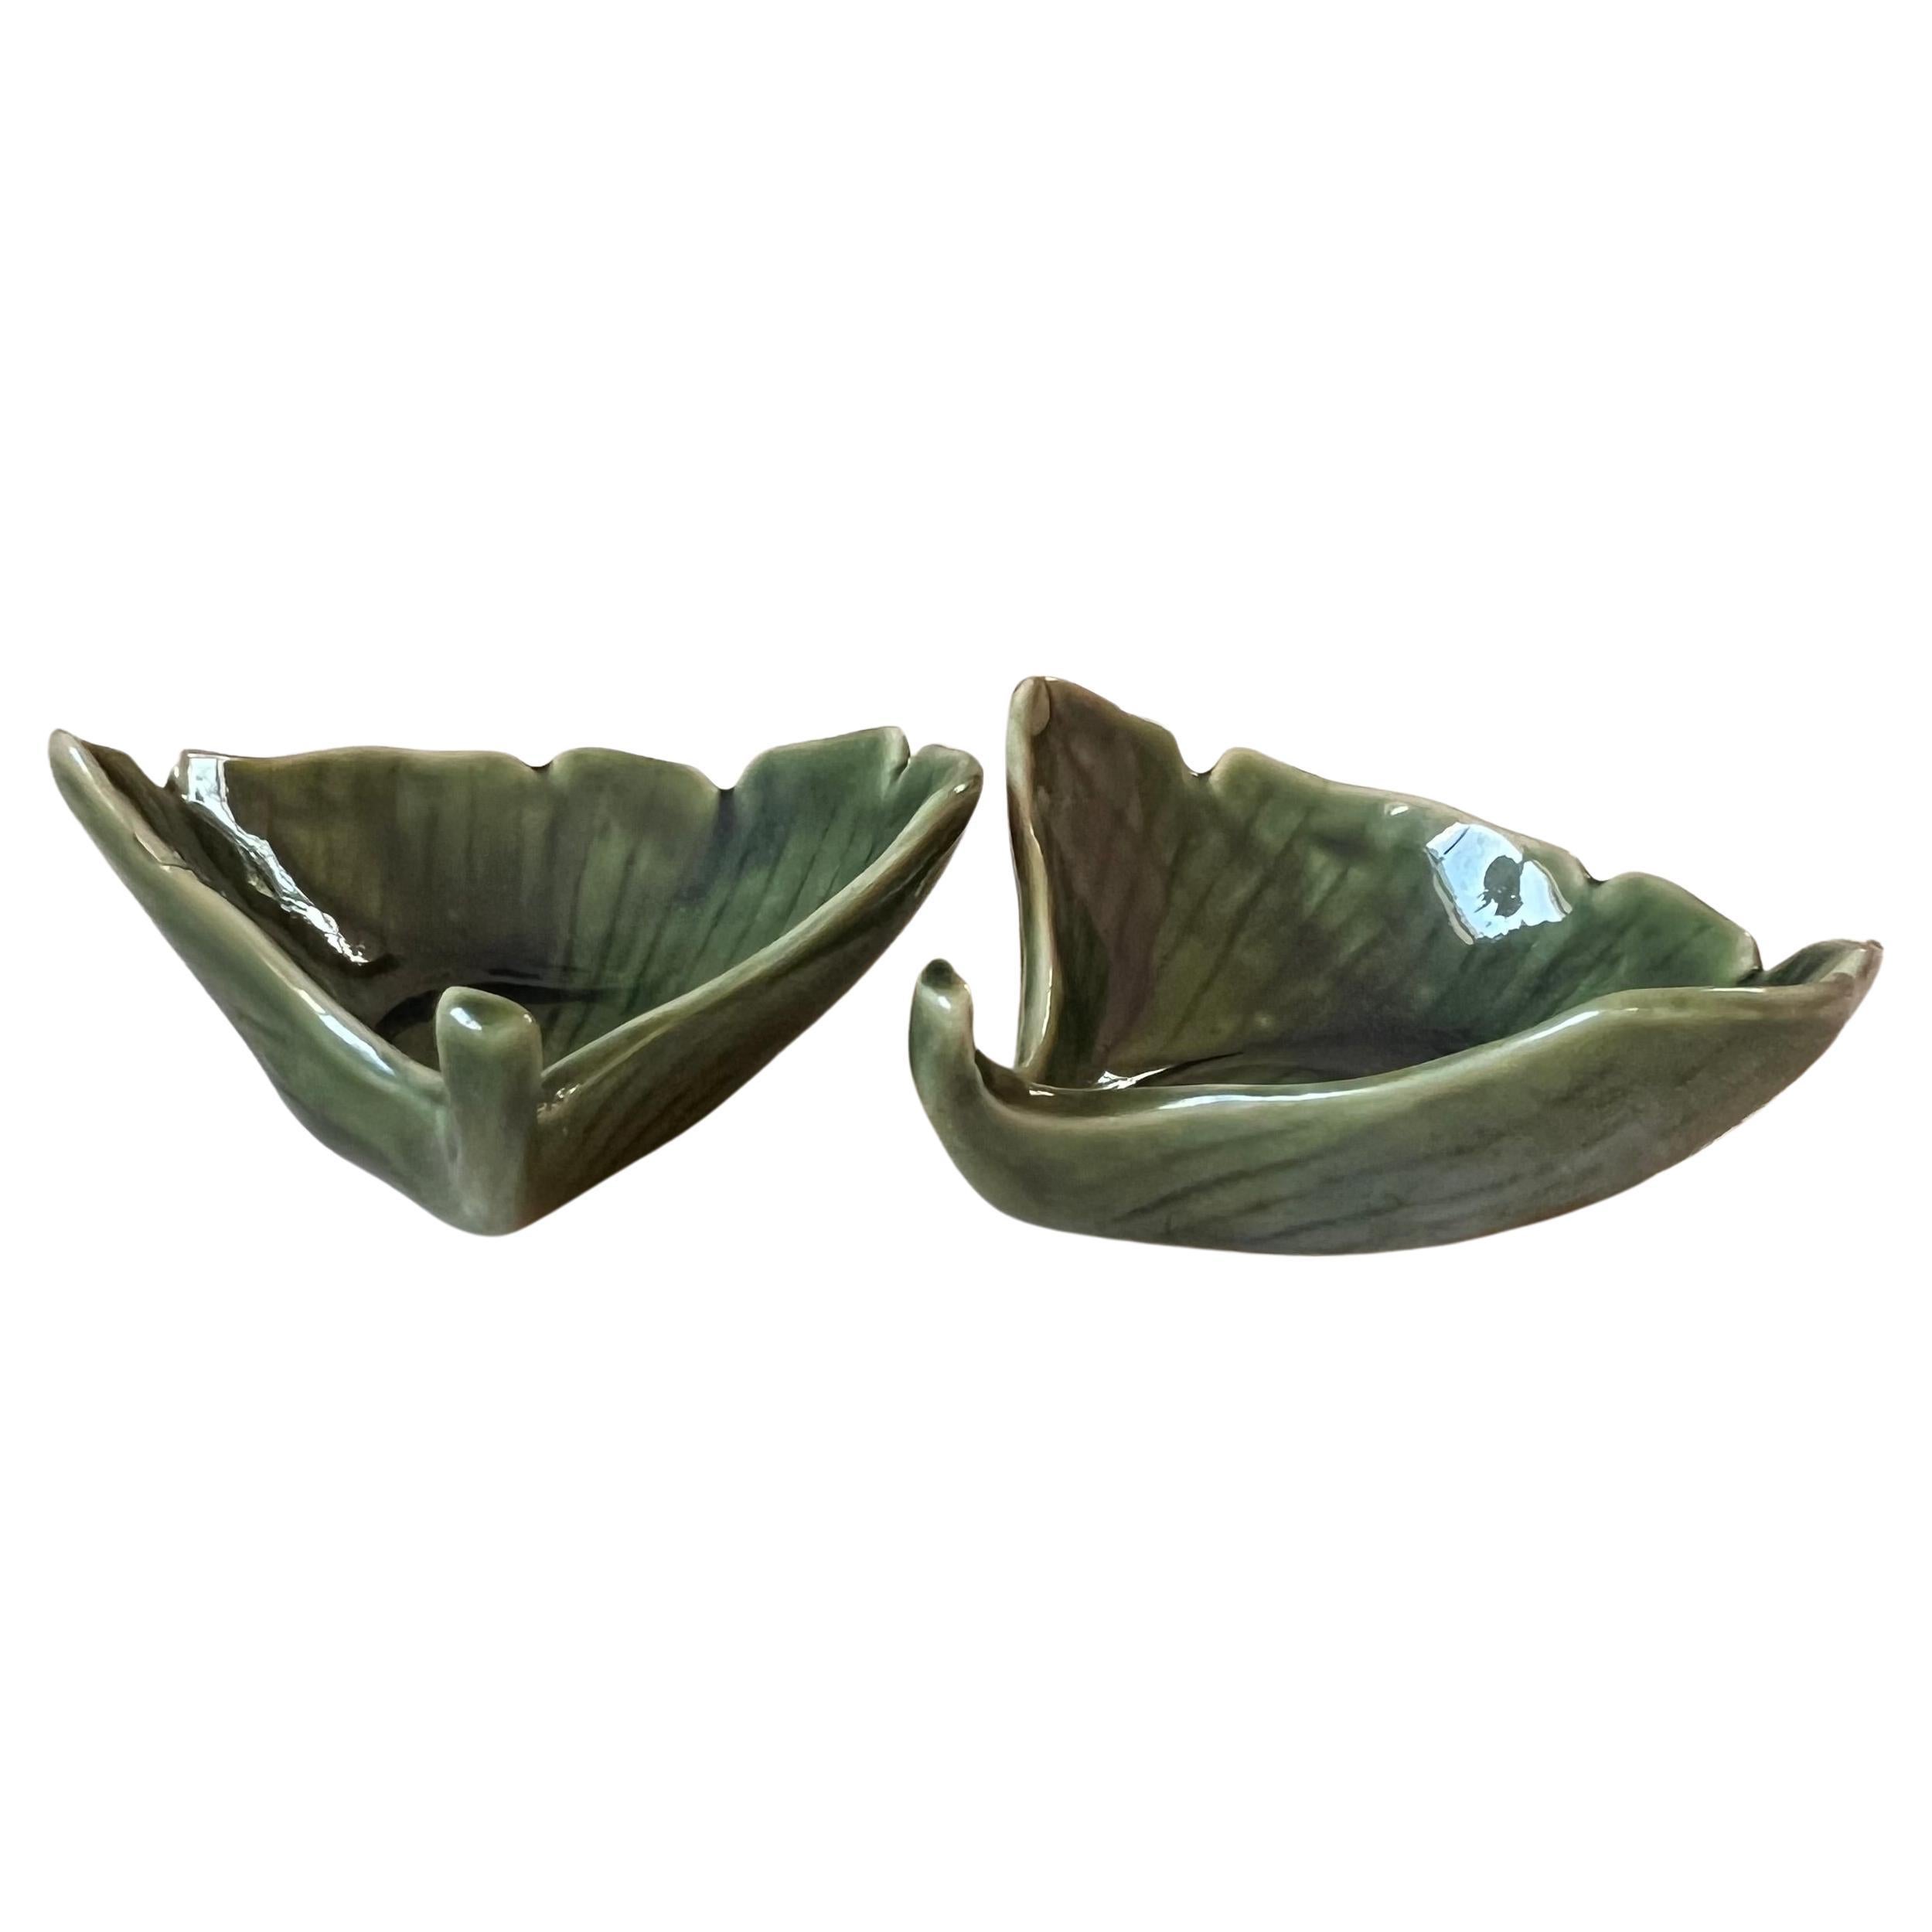 Pair of Vintage Japanese Leaf Dishes, 20th Century